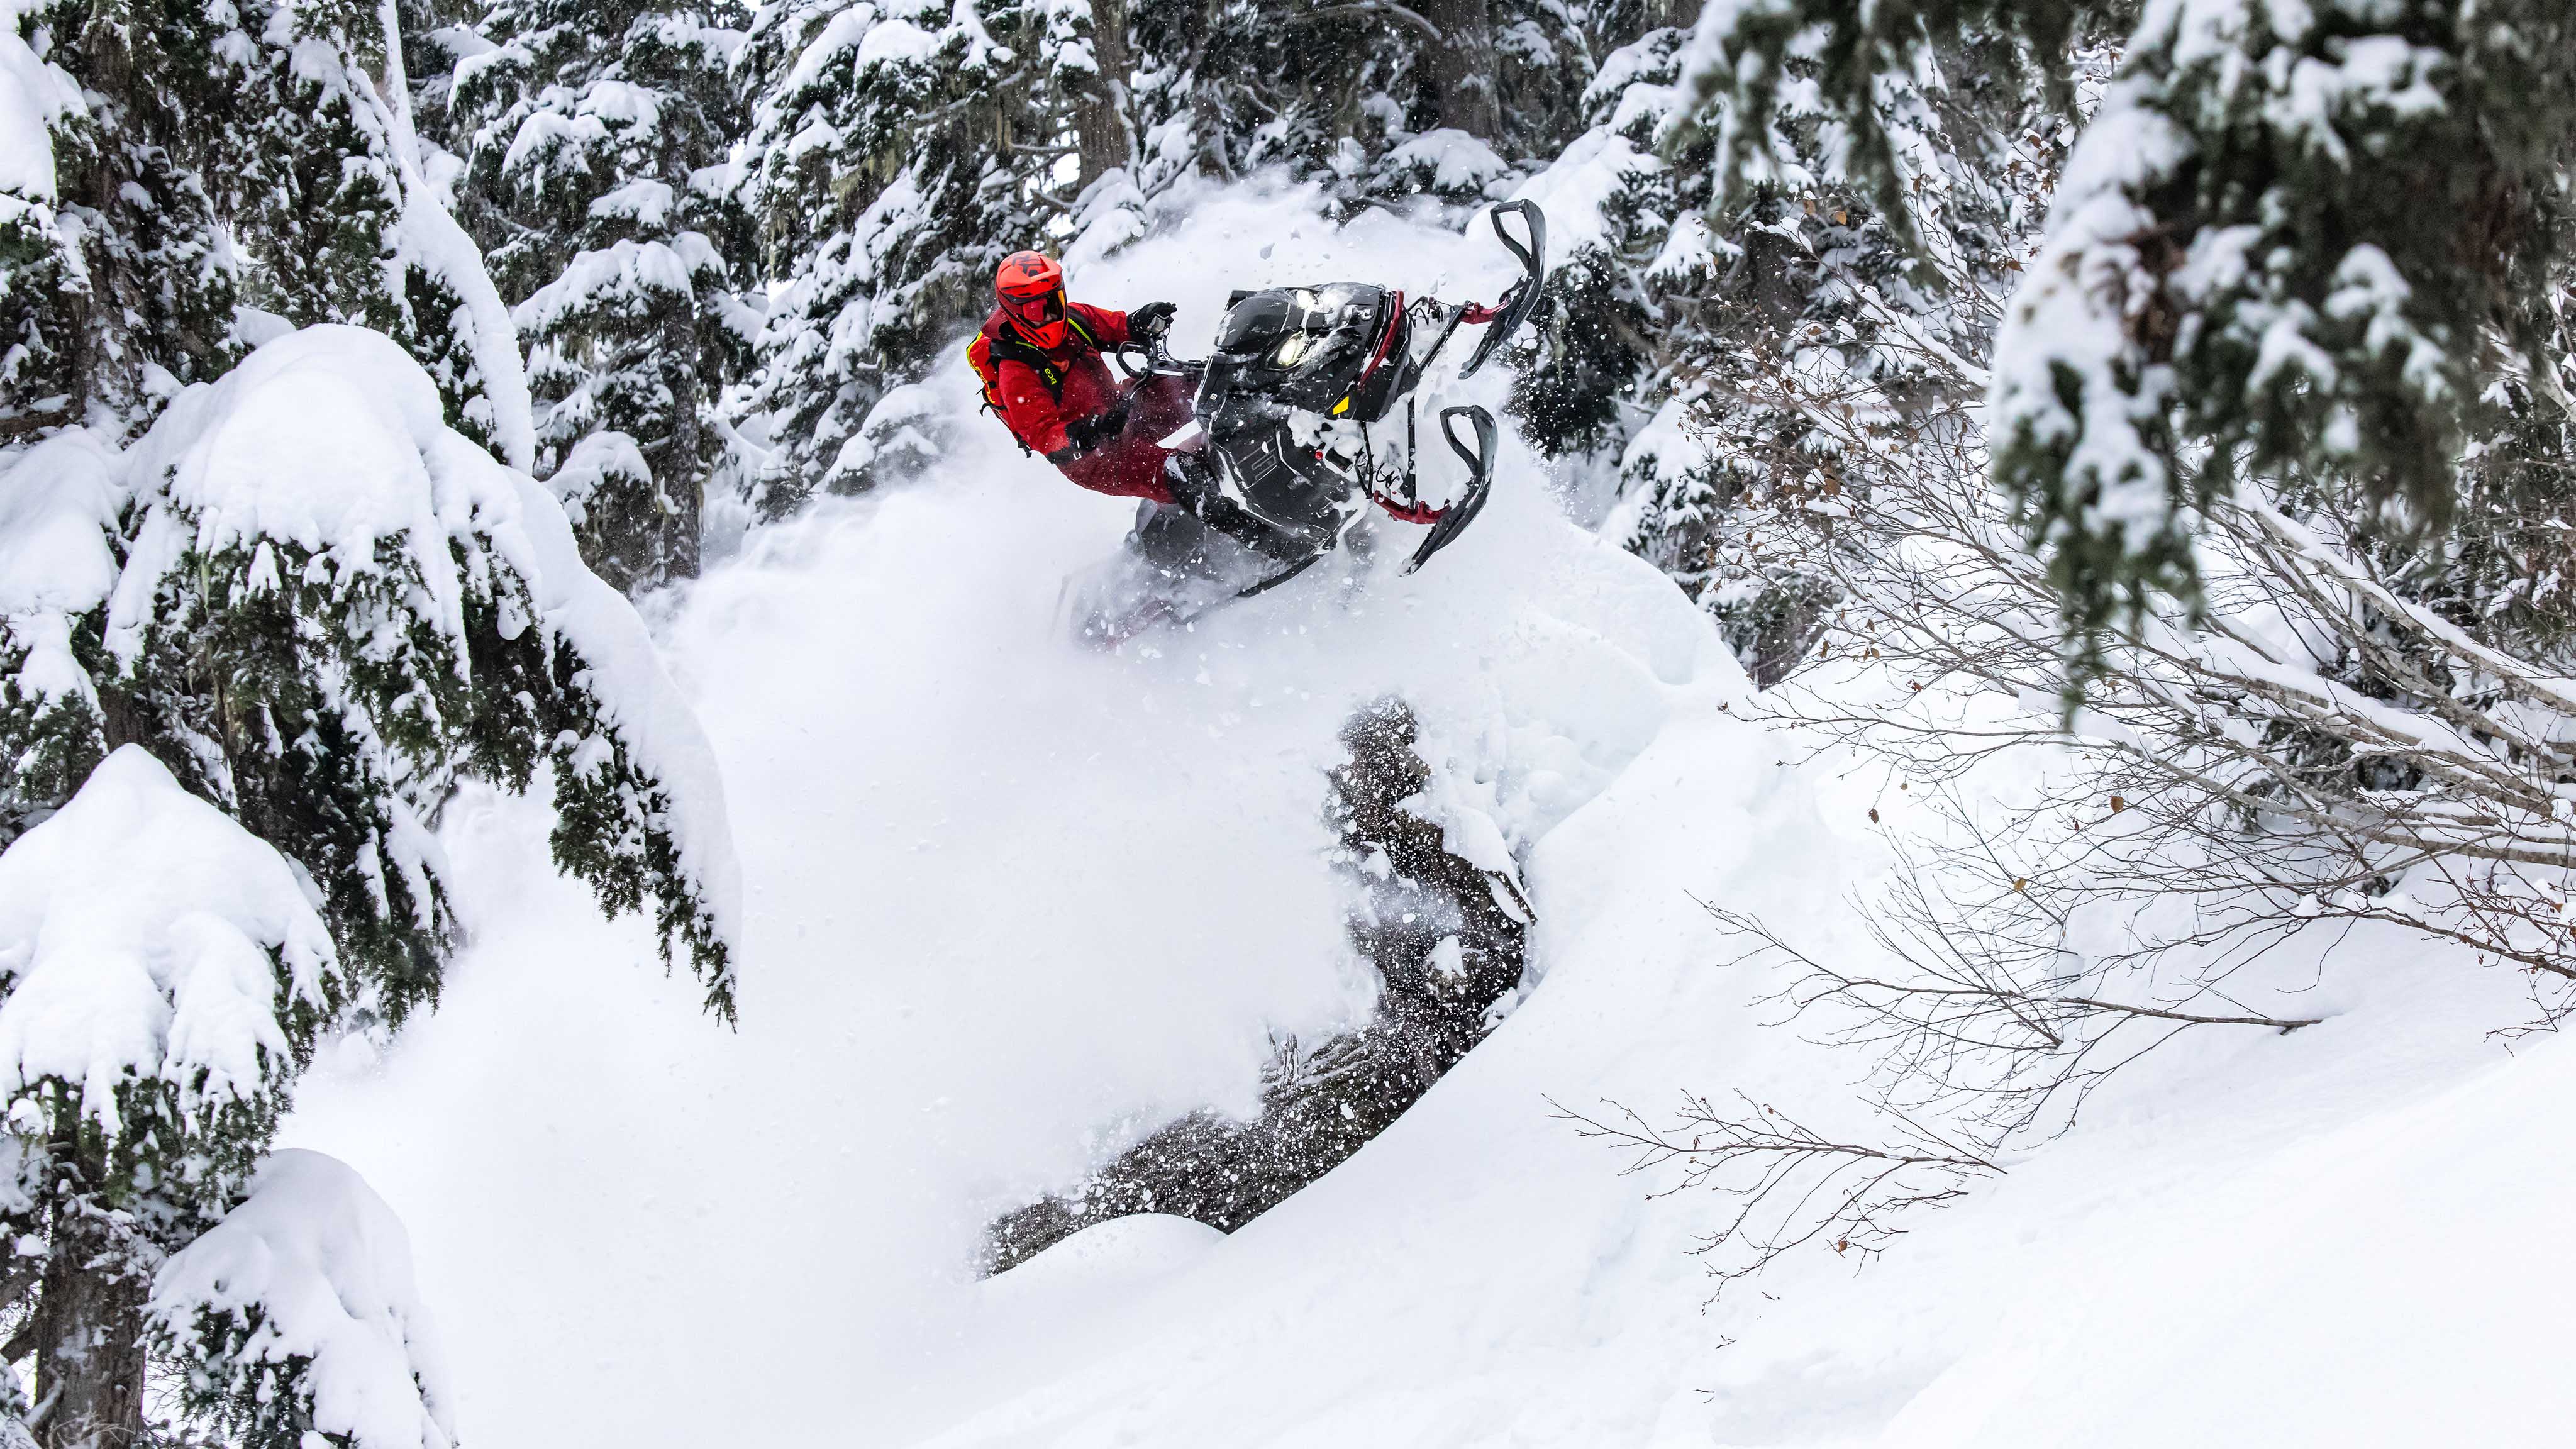 Man riding Off-Trail with the new Ski-doo deep snow snowmobile